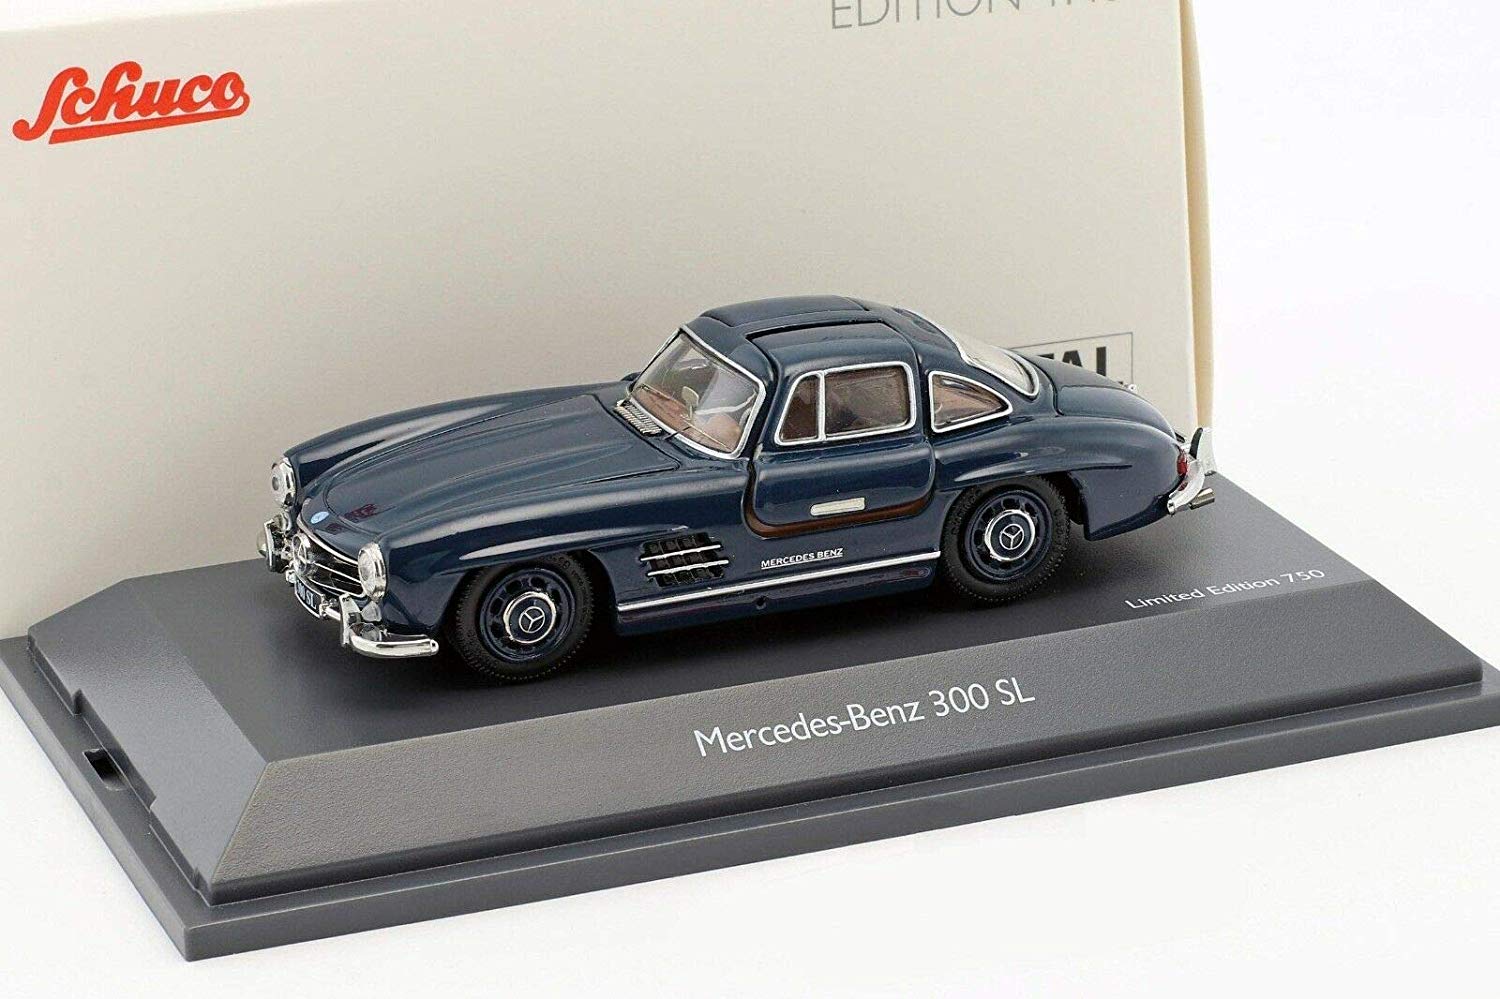 Simba Dickie 450249600 Model Miniatures Mercedes Benz 300 SL Coupe 1:43